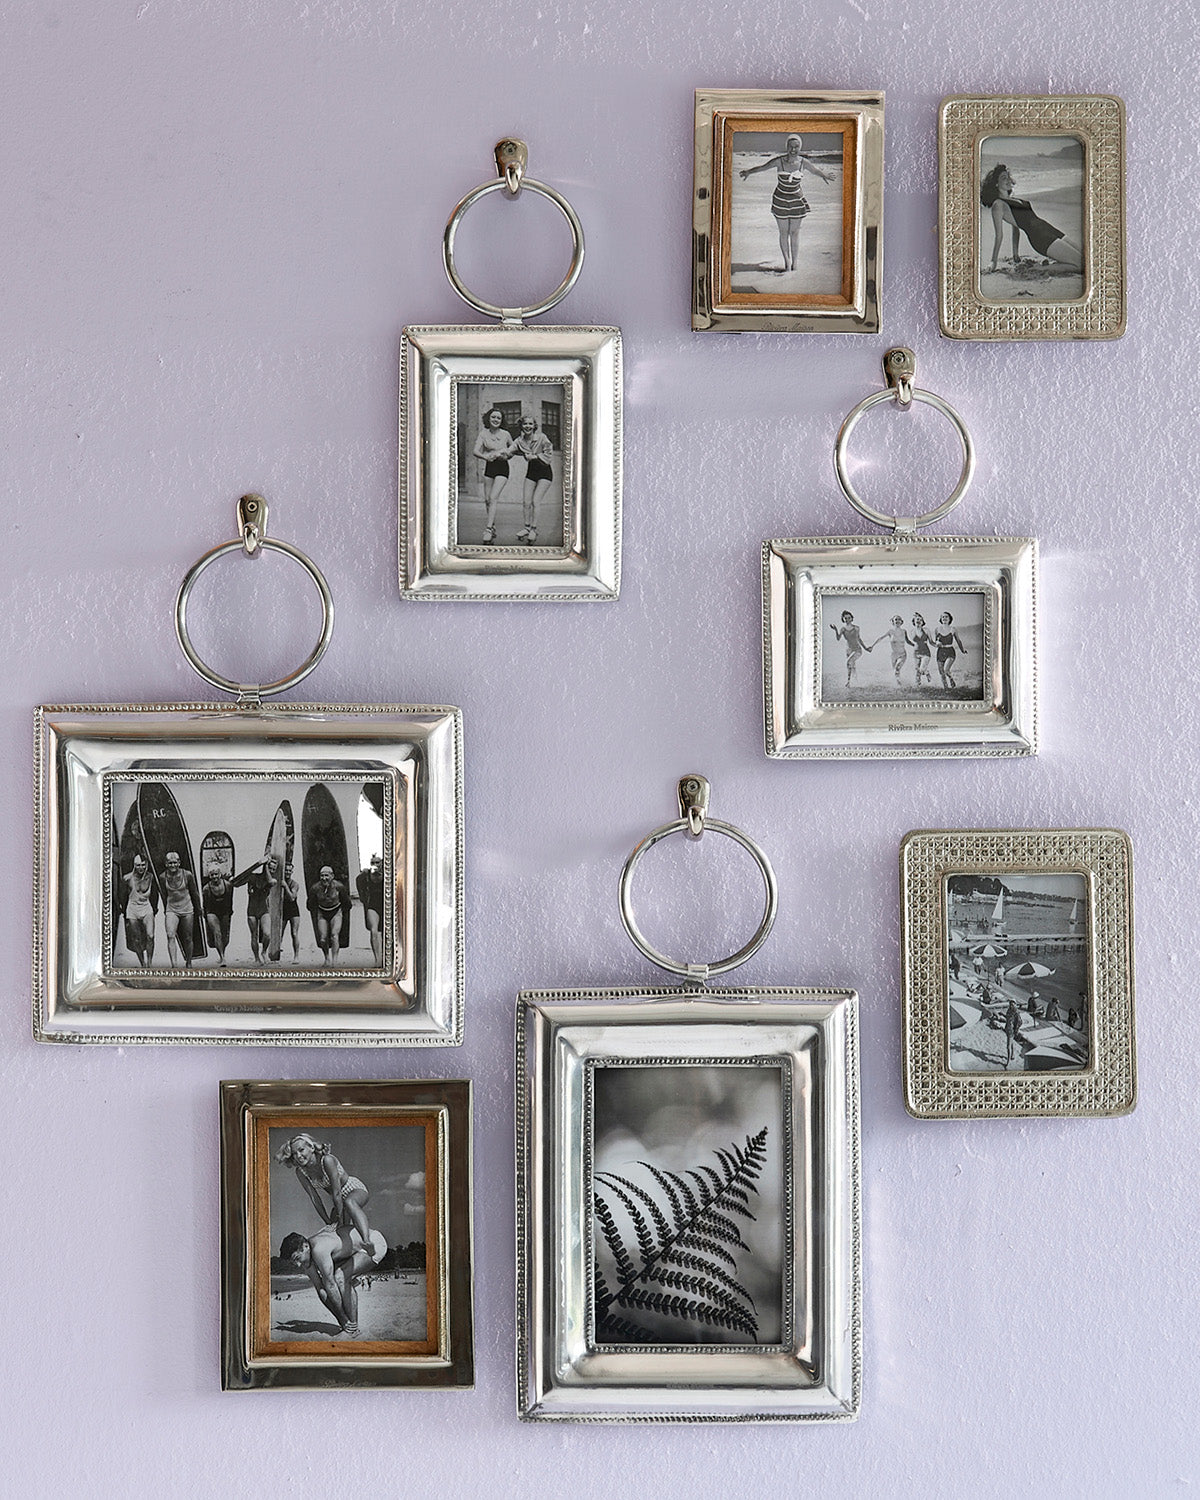 CORDOBA PHOTO FRAME SILVER XL hanging on violet wall by Riviera Maison